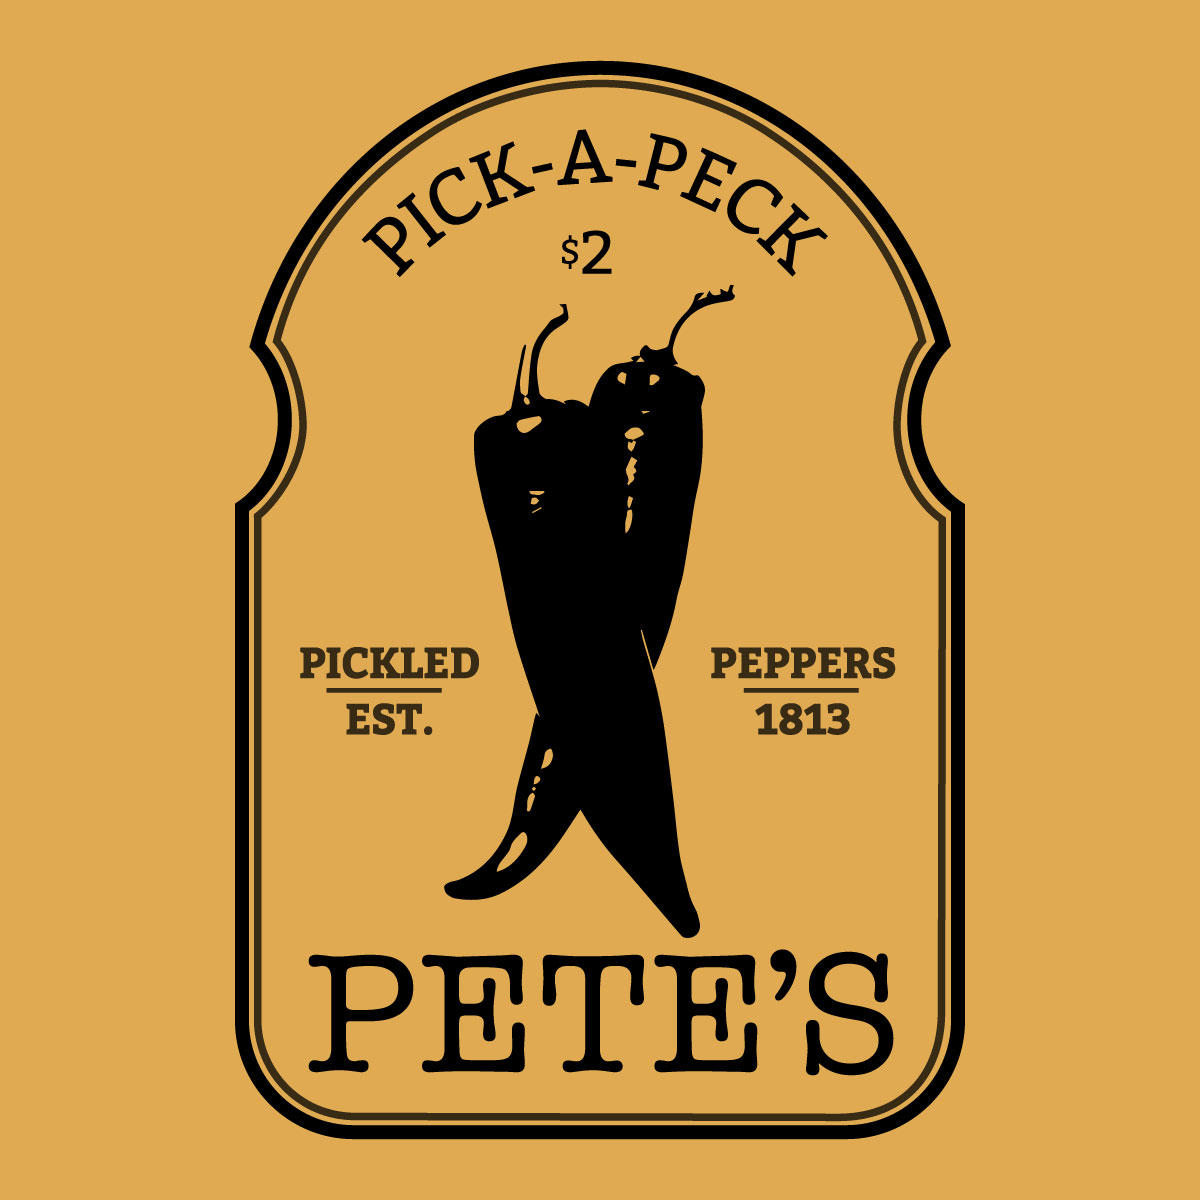 Pete's Peppers